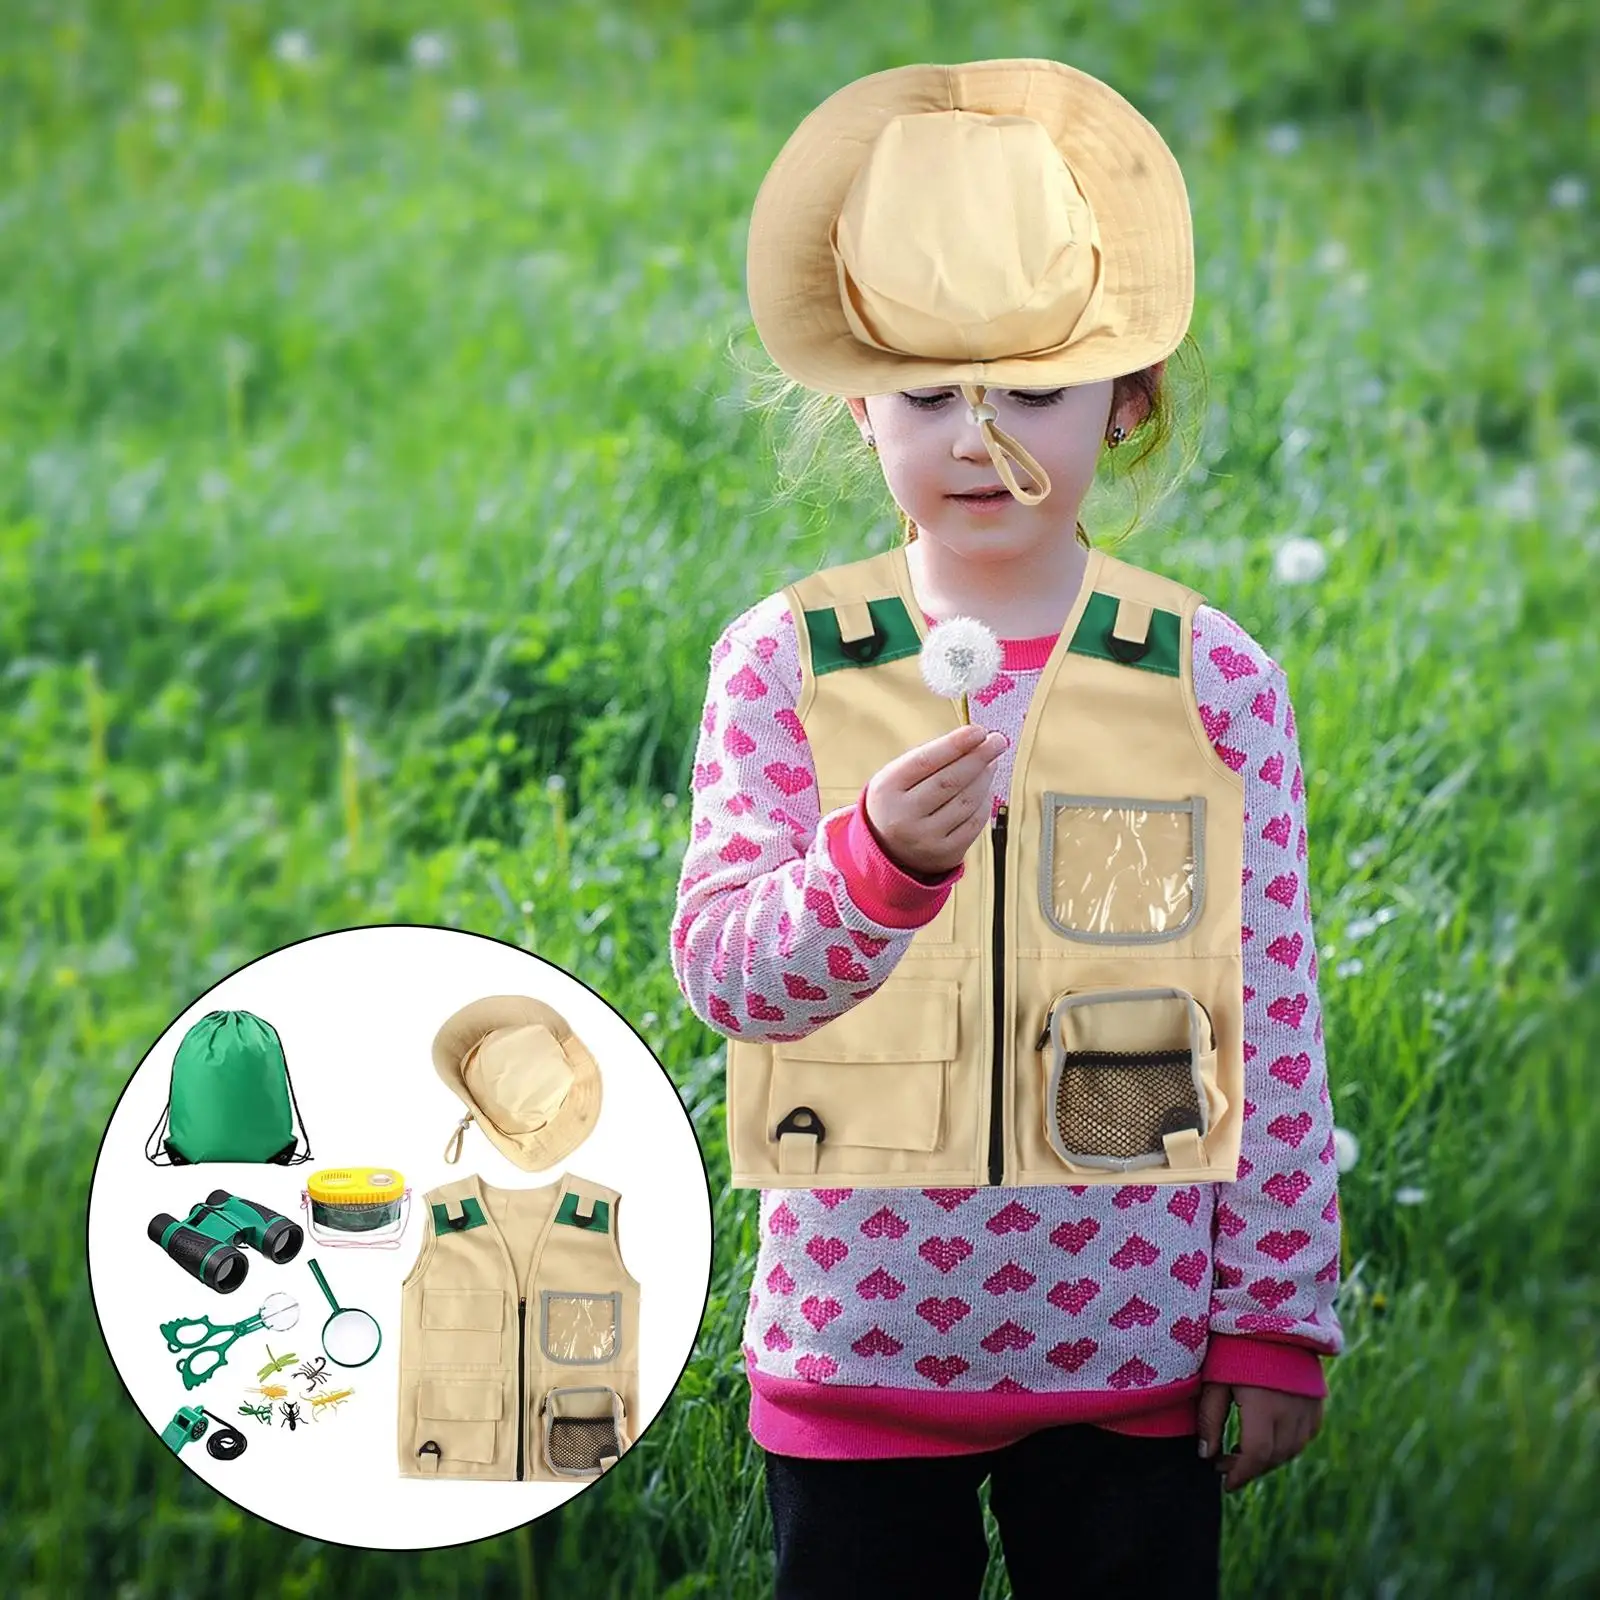 Durable Outdoor Adventure Kit Cargo Vest Hat Set 530 Telescope Magnifying Glass Camping Toys for Camping Hiking Backyard Kids